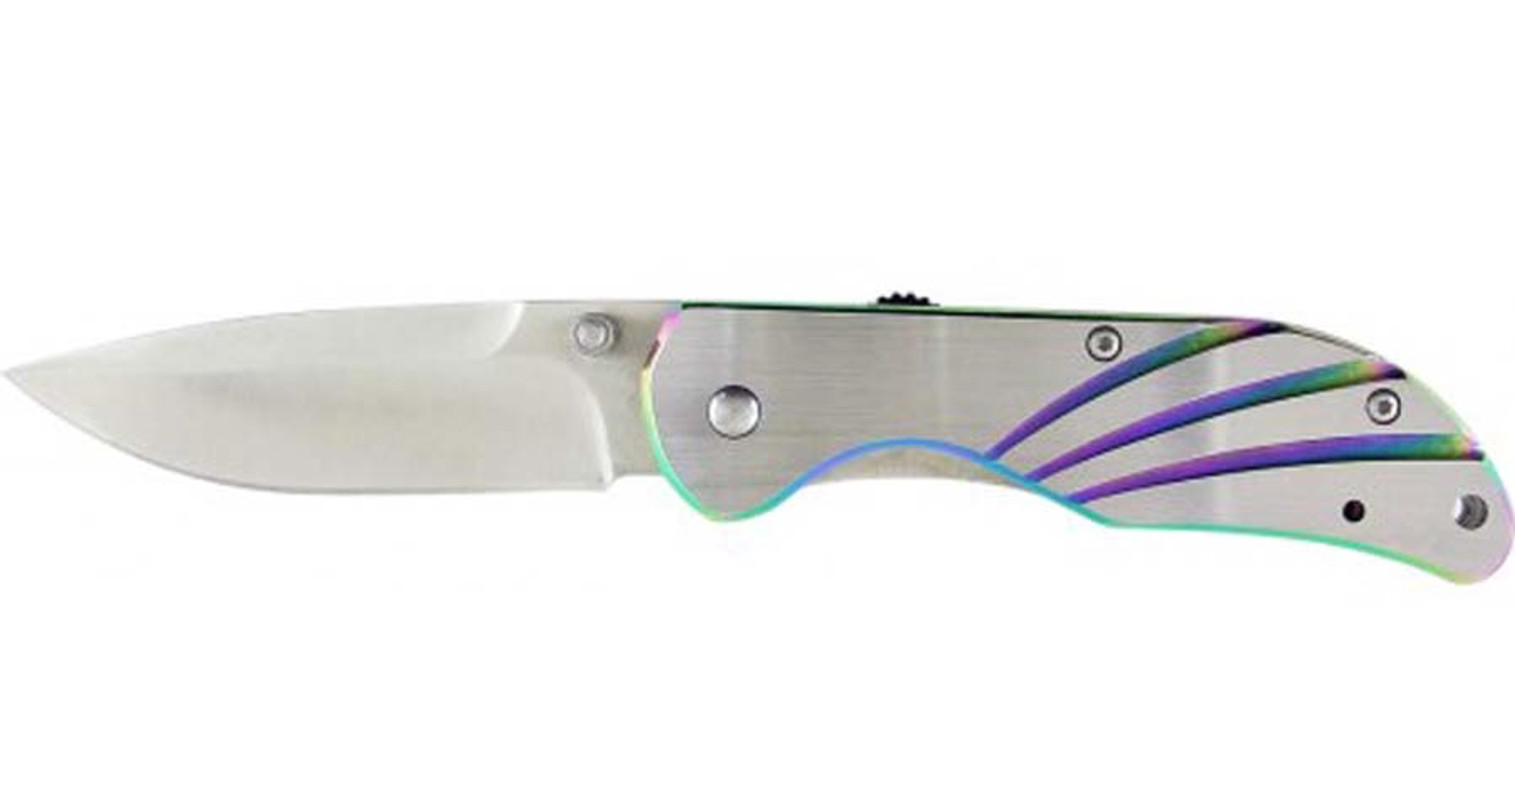 RUKO RUK0149RTA, 440A, 3" Folding Blade Assisted Open Knife, TiN Accented Stainless Steel Handle, boxed